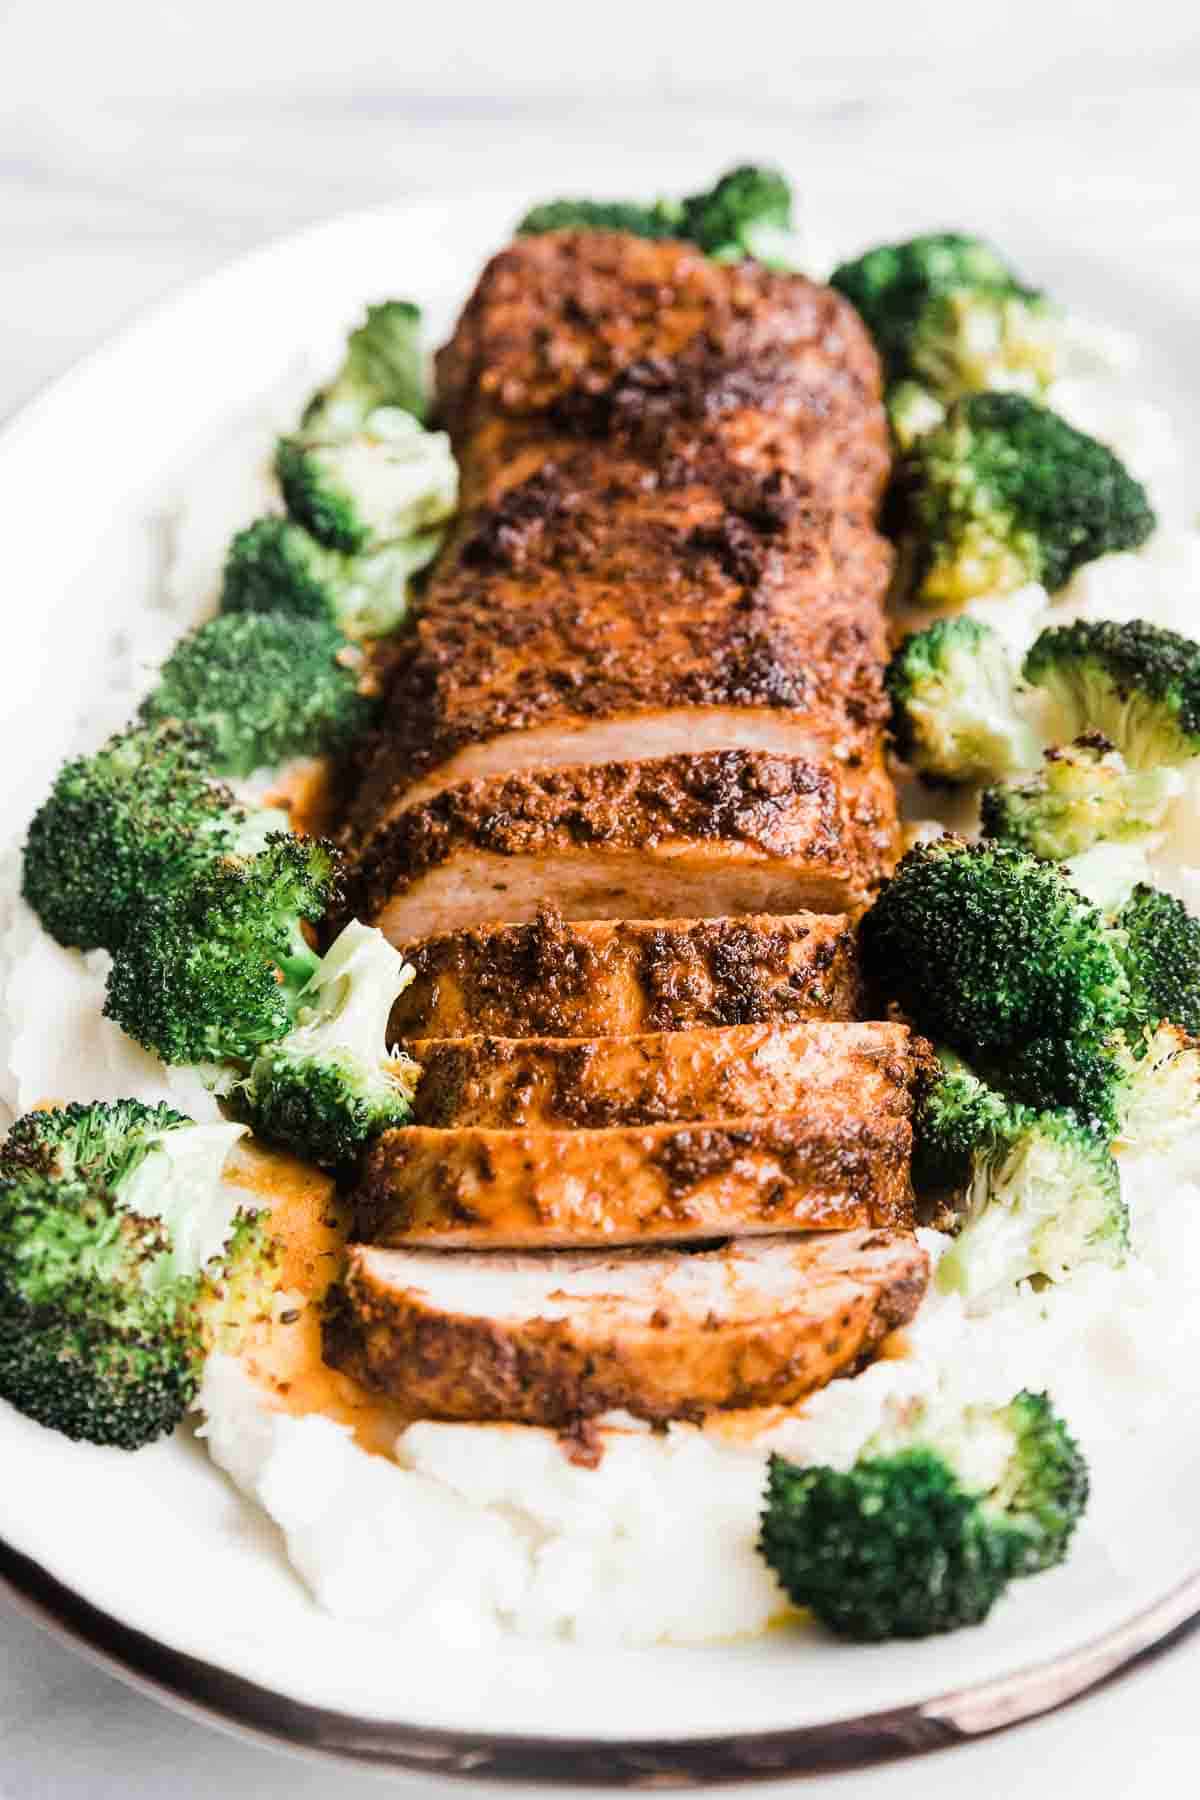 A ¾ shot of baked pork tenderloin on a bed of mashed potatoes. There is broccoli to the side.